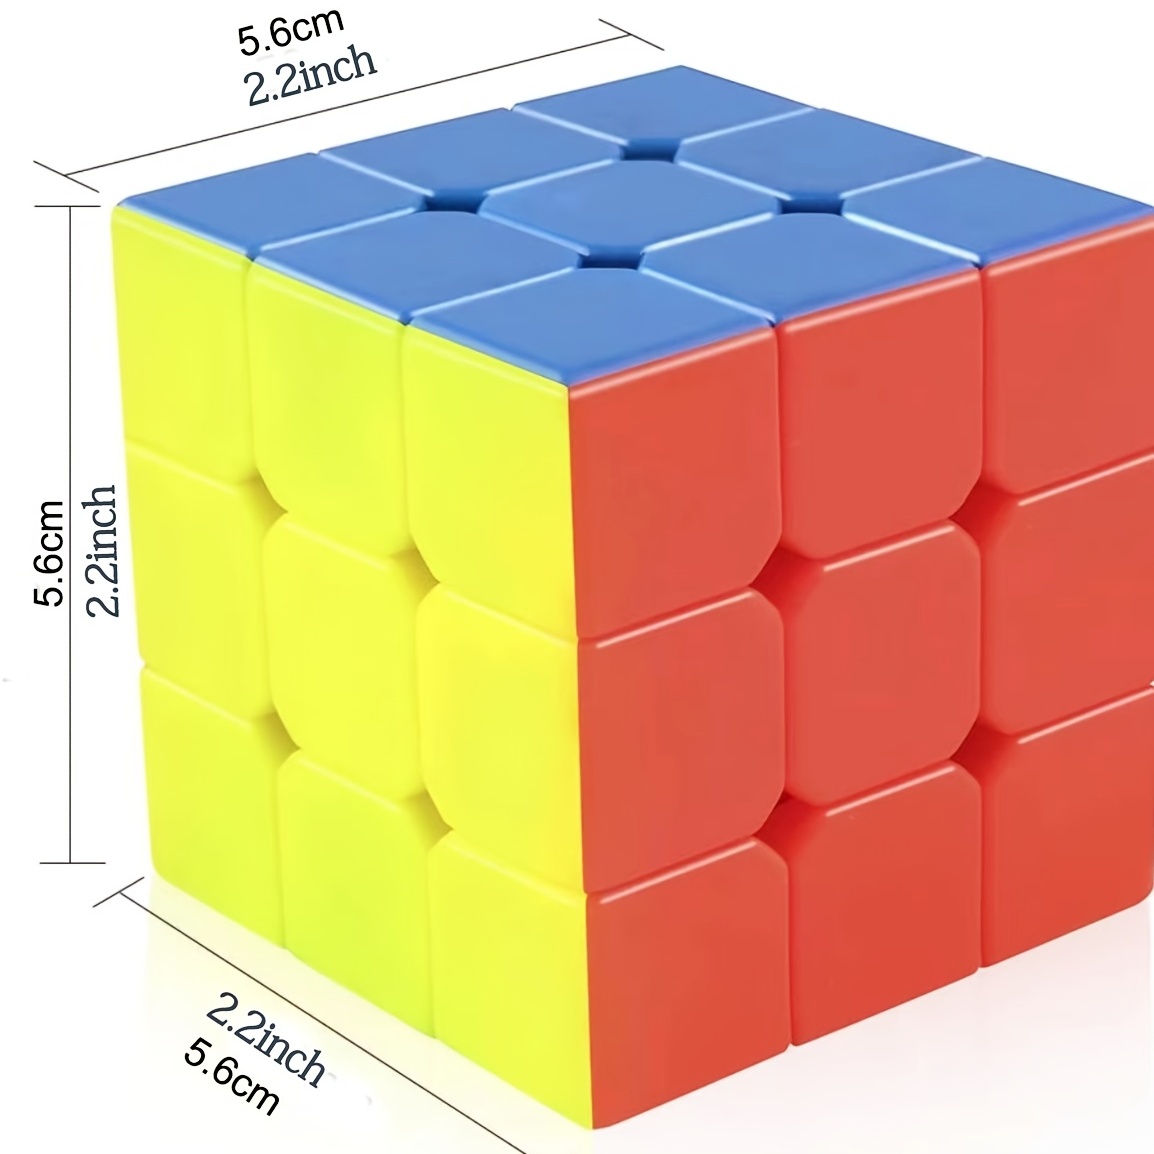 Cyclone Boy Megaminxeds Cube 3x3 Magic Cube 3Layers Wumofang Speed Cube  Megaminx Professional Puzzle Toys For Children Kids Gift